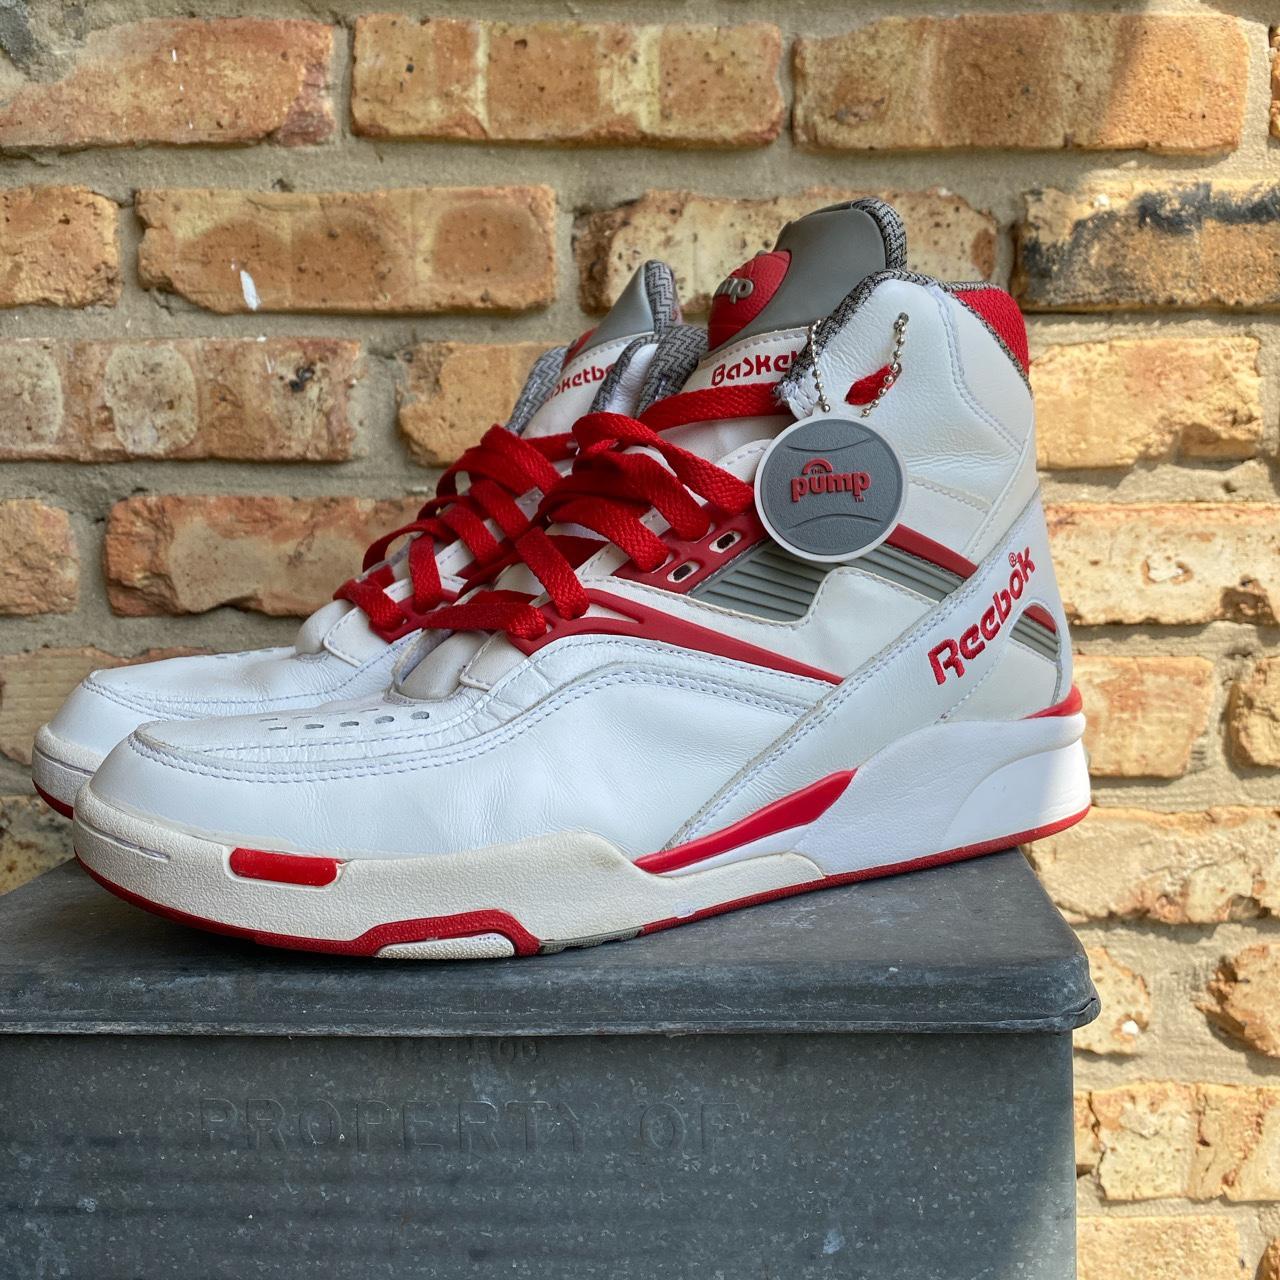 Reebok Men's White and Red Trainers | Depop